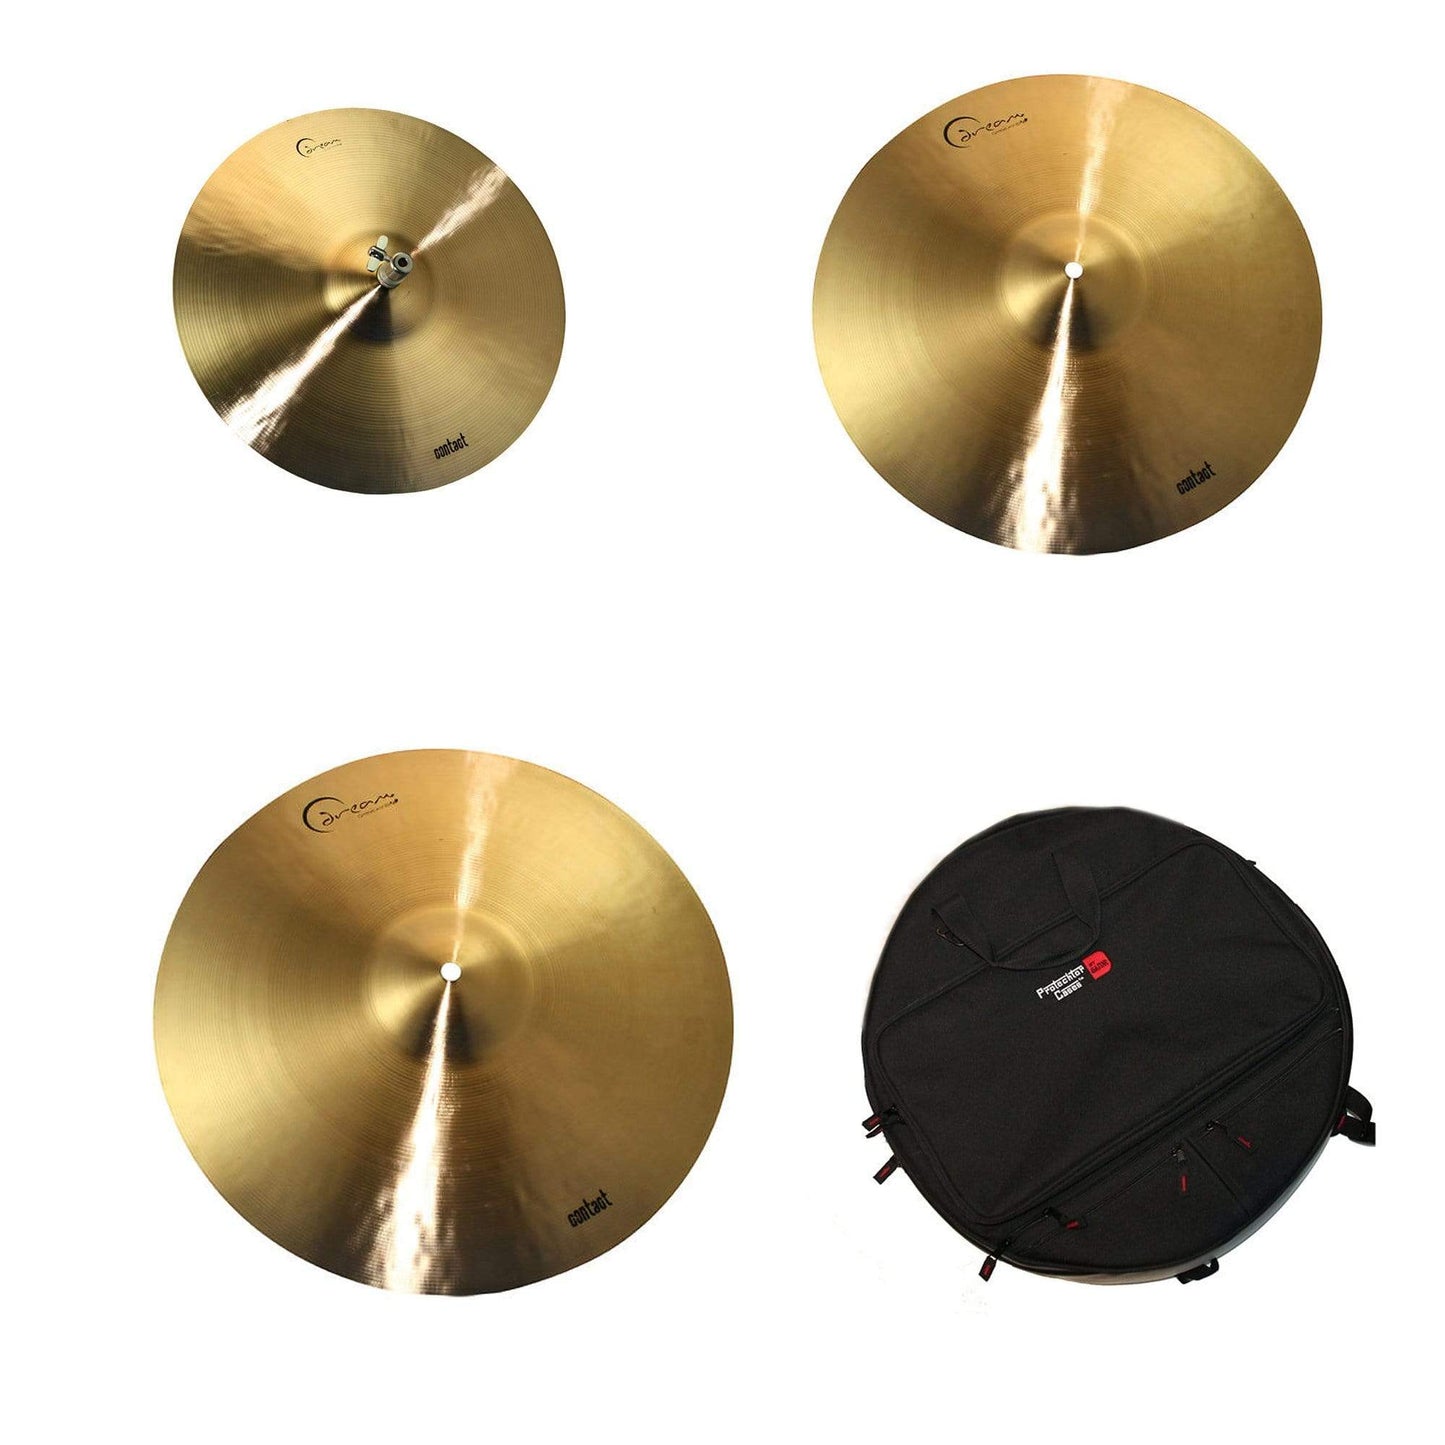 Dream 15/18/22" Dream Contact Cymbal Set (w/Gator 22" Backpack Cymbal Bag) Drums and Percussion / Cymbals / Cymbal Packs